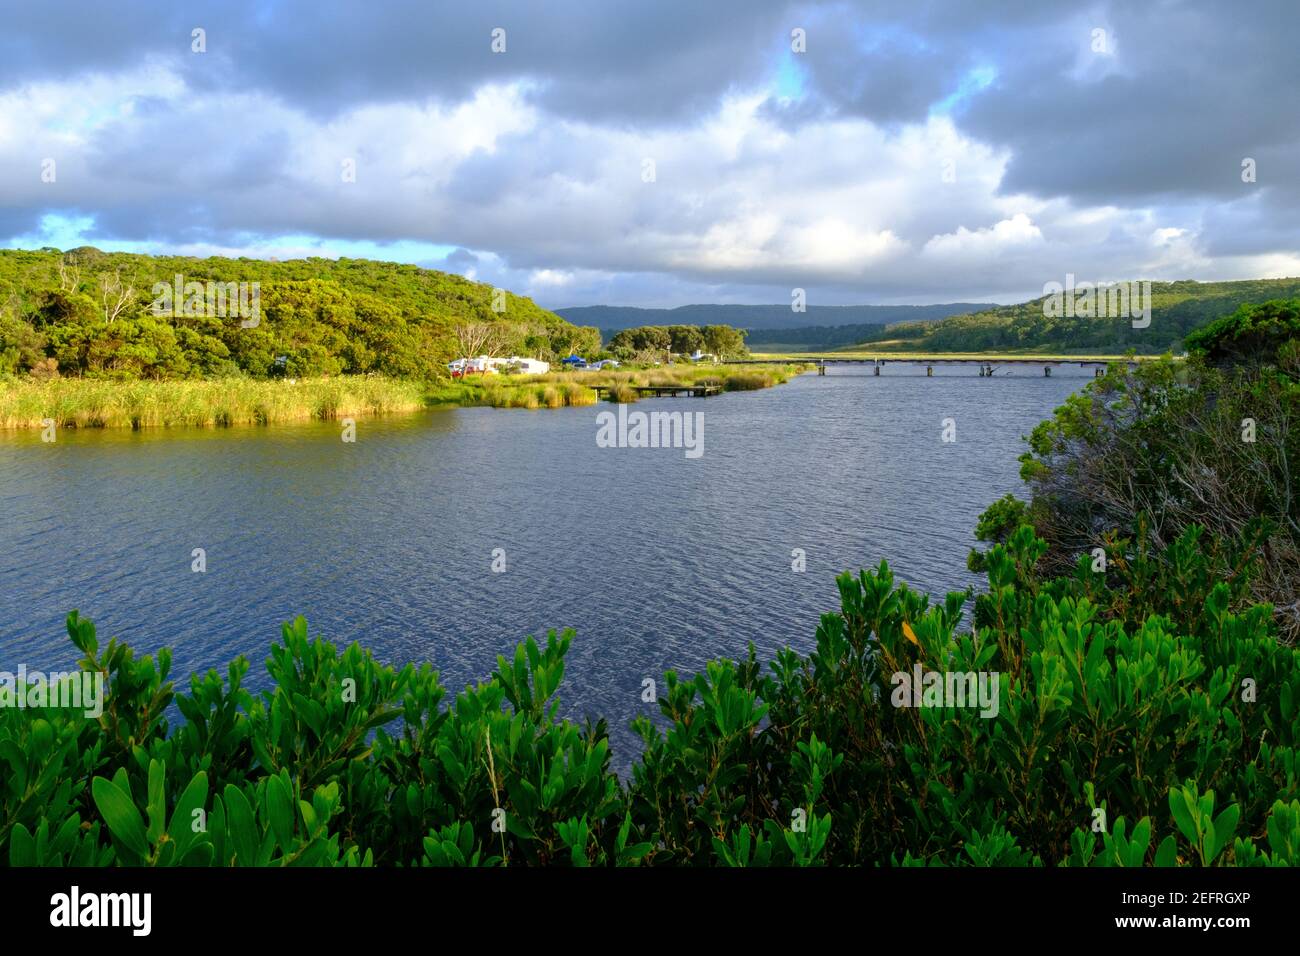 The view looking north along the Aire River with the camping ground and bridge in the background, Victoria, Australia Stock Photo